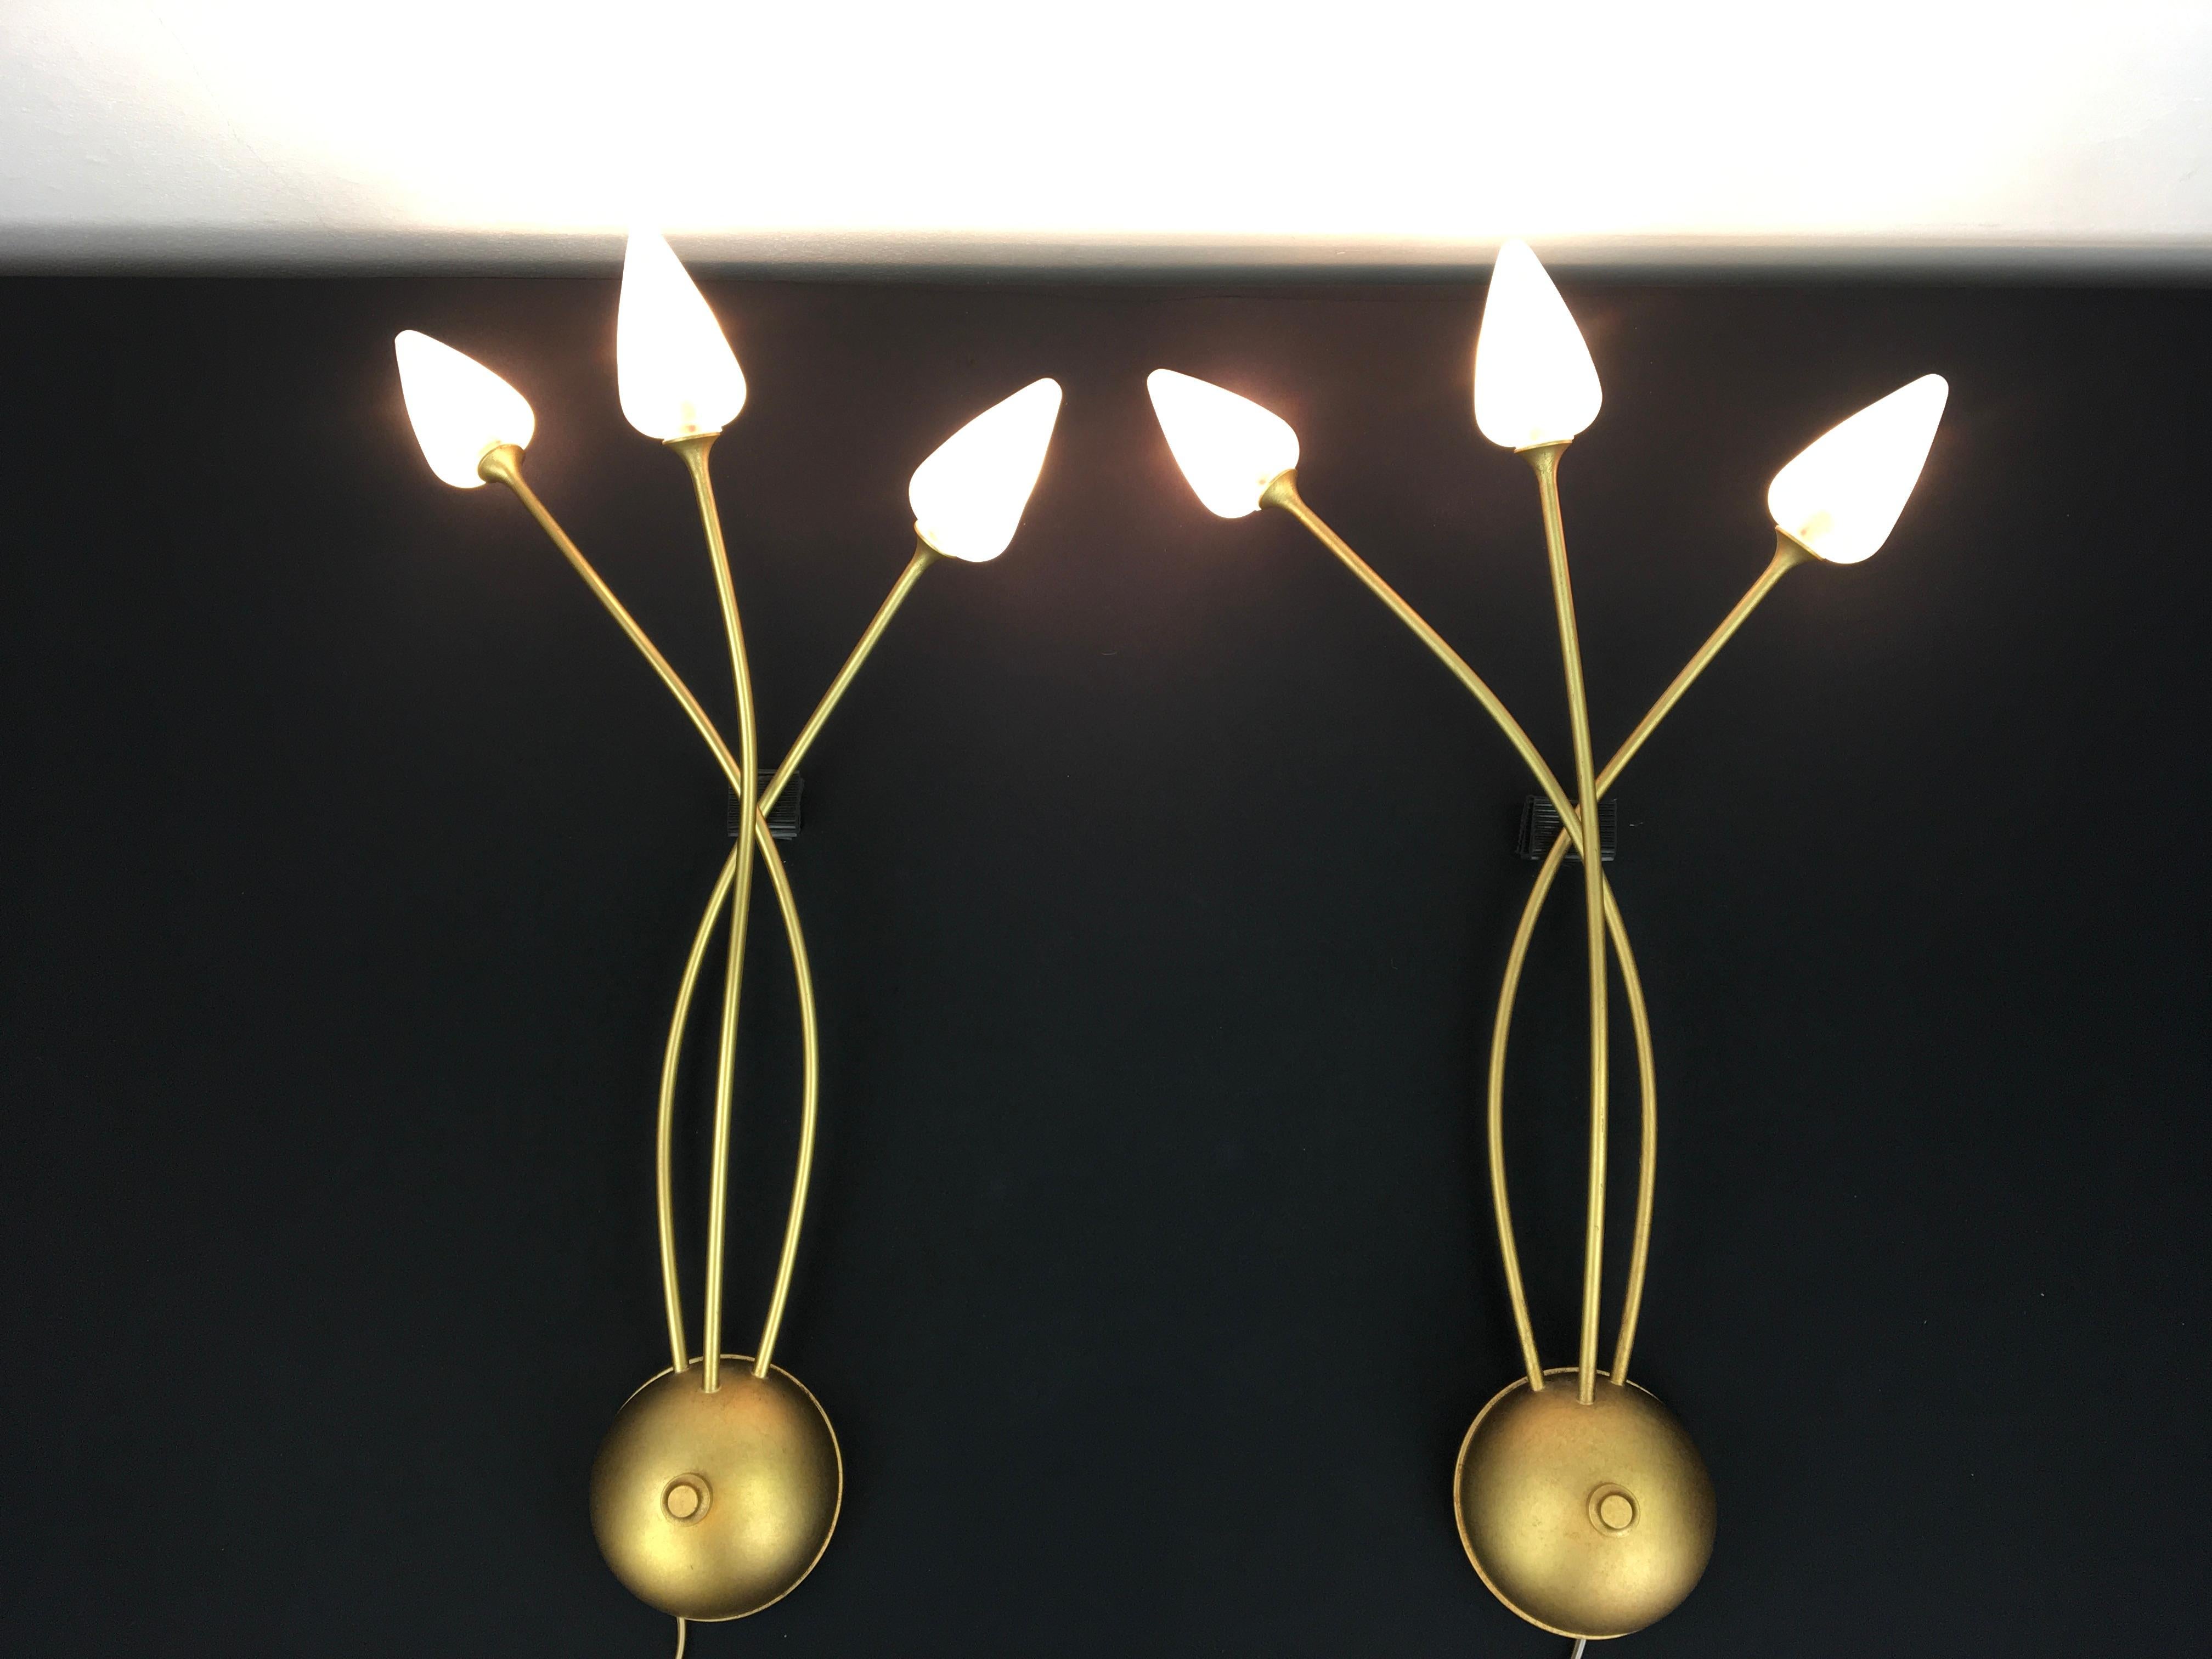 Pair of gilded metal wall lights, made in Italy from the 1990s. 
These gilt metal wall scones have each 3 frosted glass shades in the shape of hearts. 
The metal frame has an elegant design.
These Italian wall lights will look great in a modern,